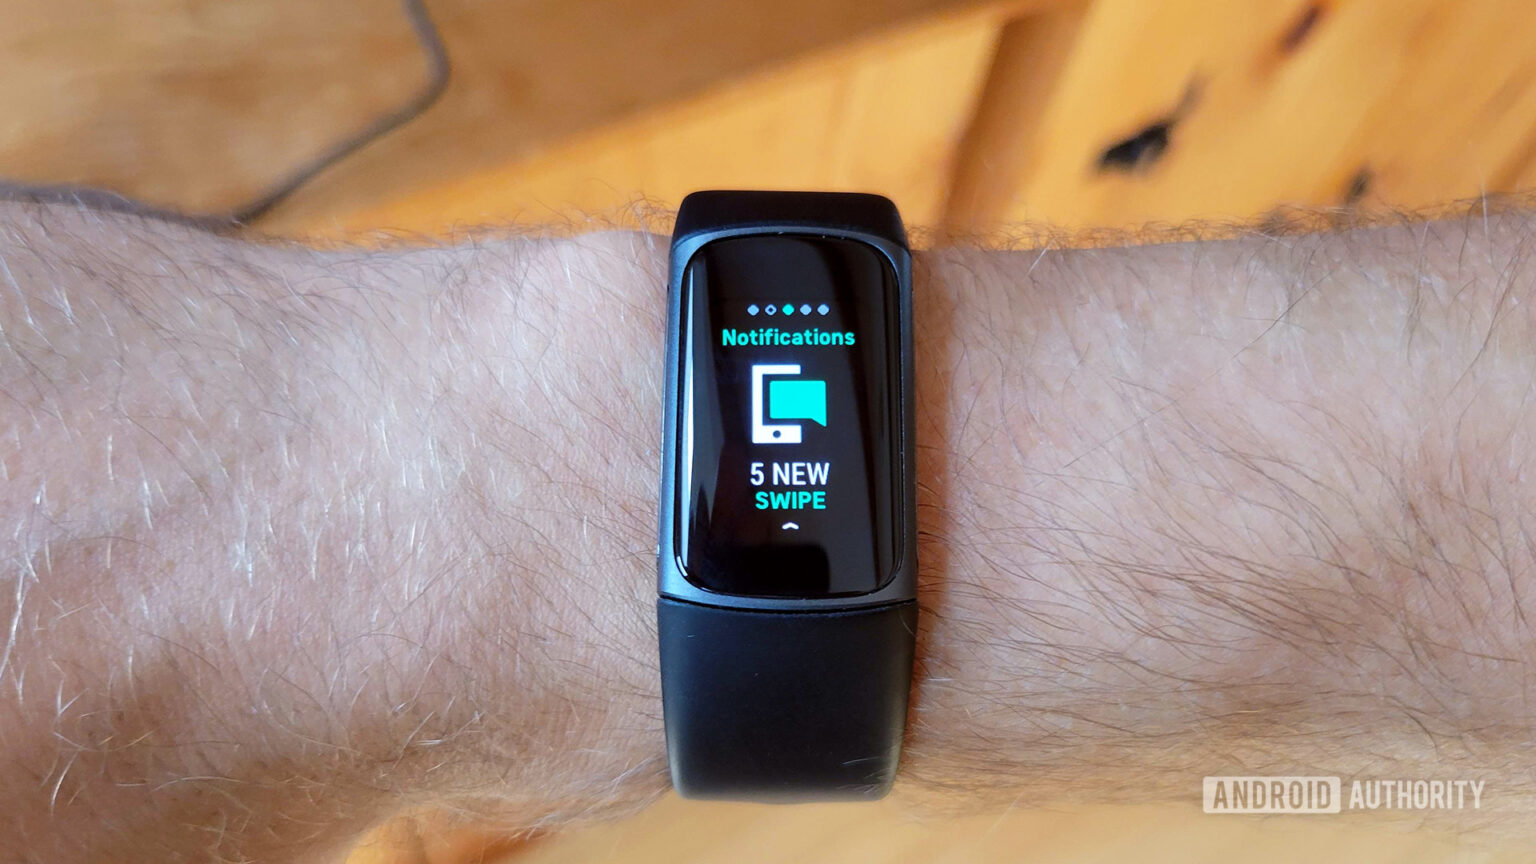 Fitbit messaging: How to receive messages, send replies from your Fitbit